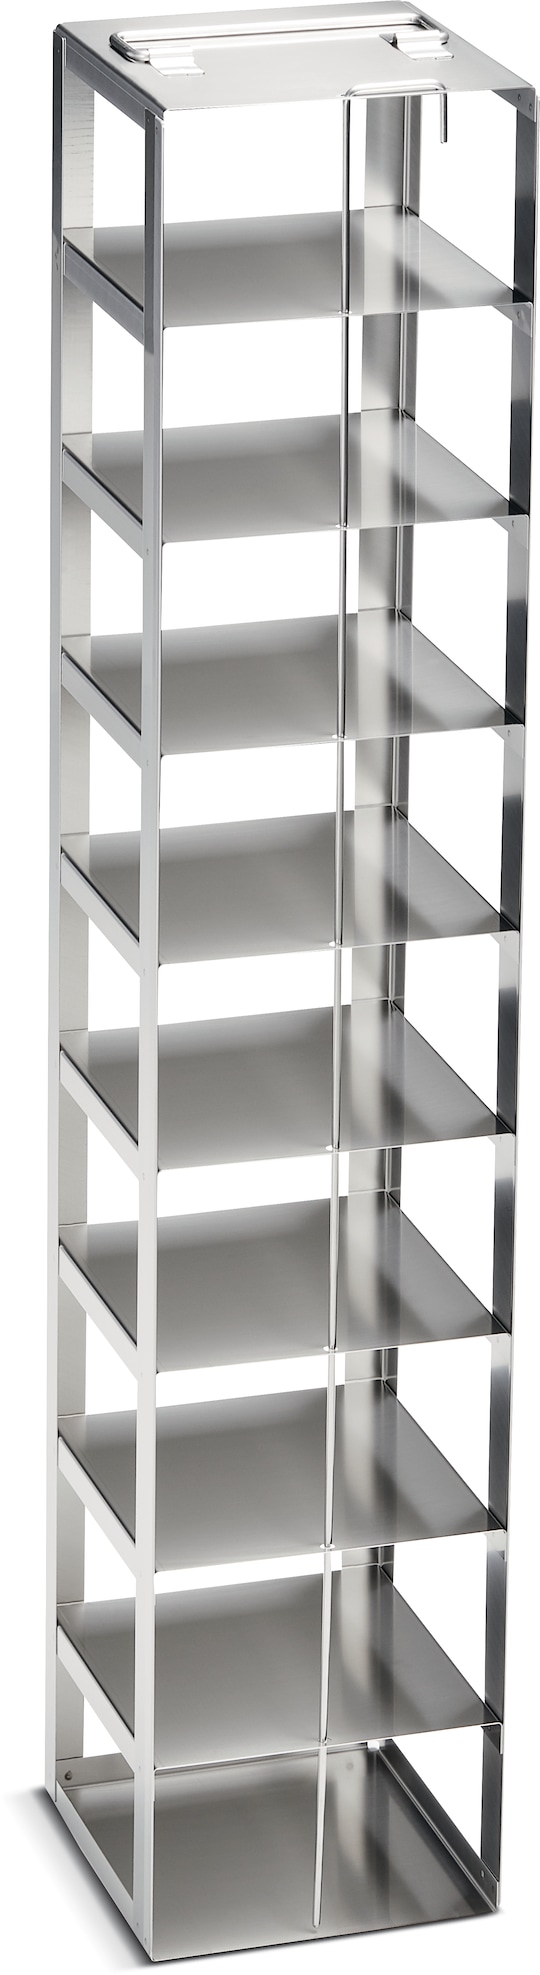 Metal tower rack for (3.0 in/ 76 mm) storage boxes in Eppendorf ULT chest freezer - (6001000311)